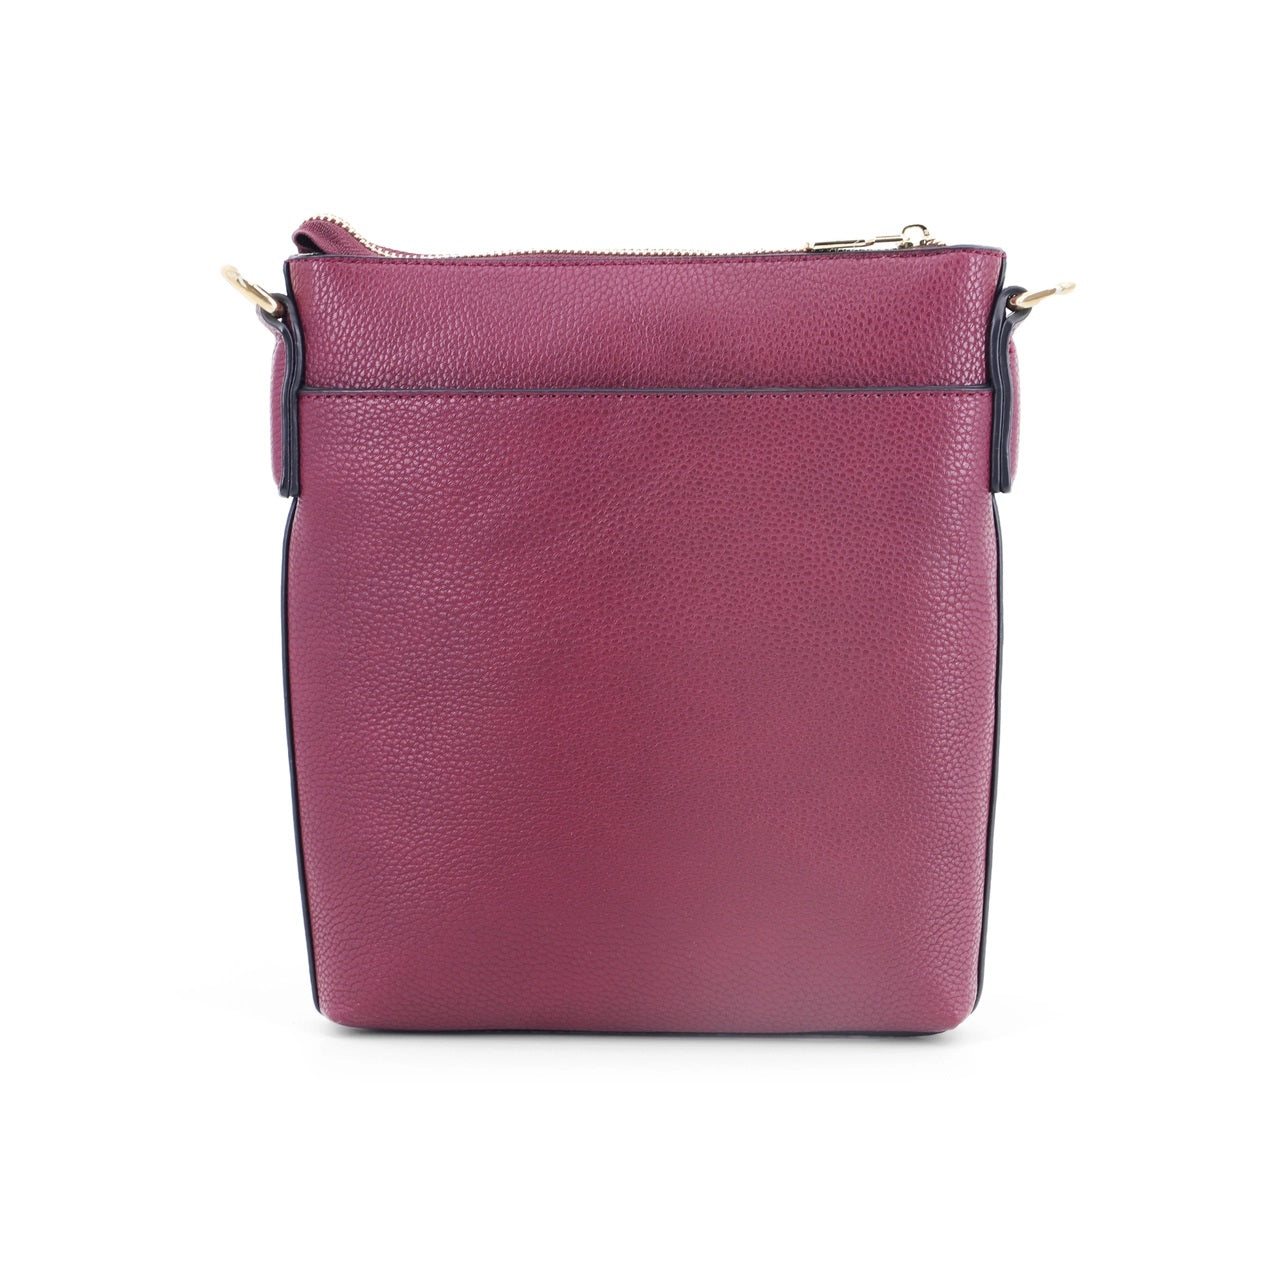 Tipperary Crystal Chelsea Cross Body Pouch - Burgundy New 2022  The Chelsea Cross Body Pouch Burgundy - Rose gold hardware The versatile and trendy Chelsea can be worn as a cross body and also over the shoulder. The Chelsea has an adjustable strap and easily accessible outside pocket and secure front zip pocket.